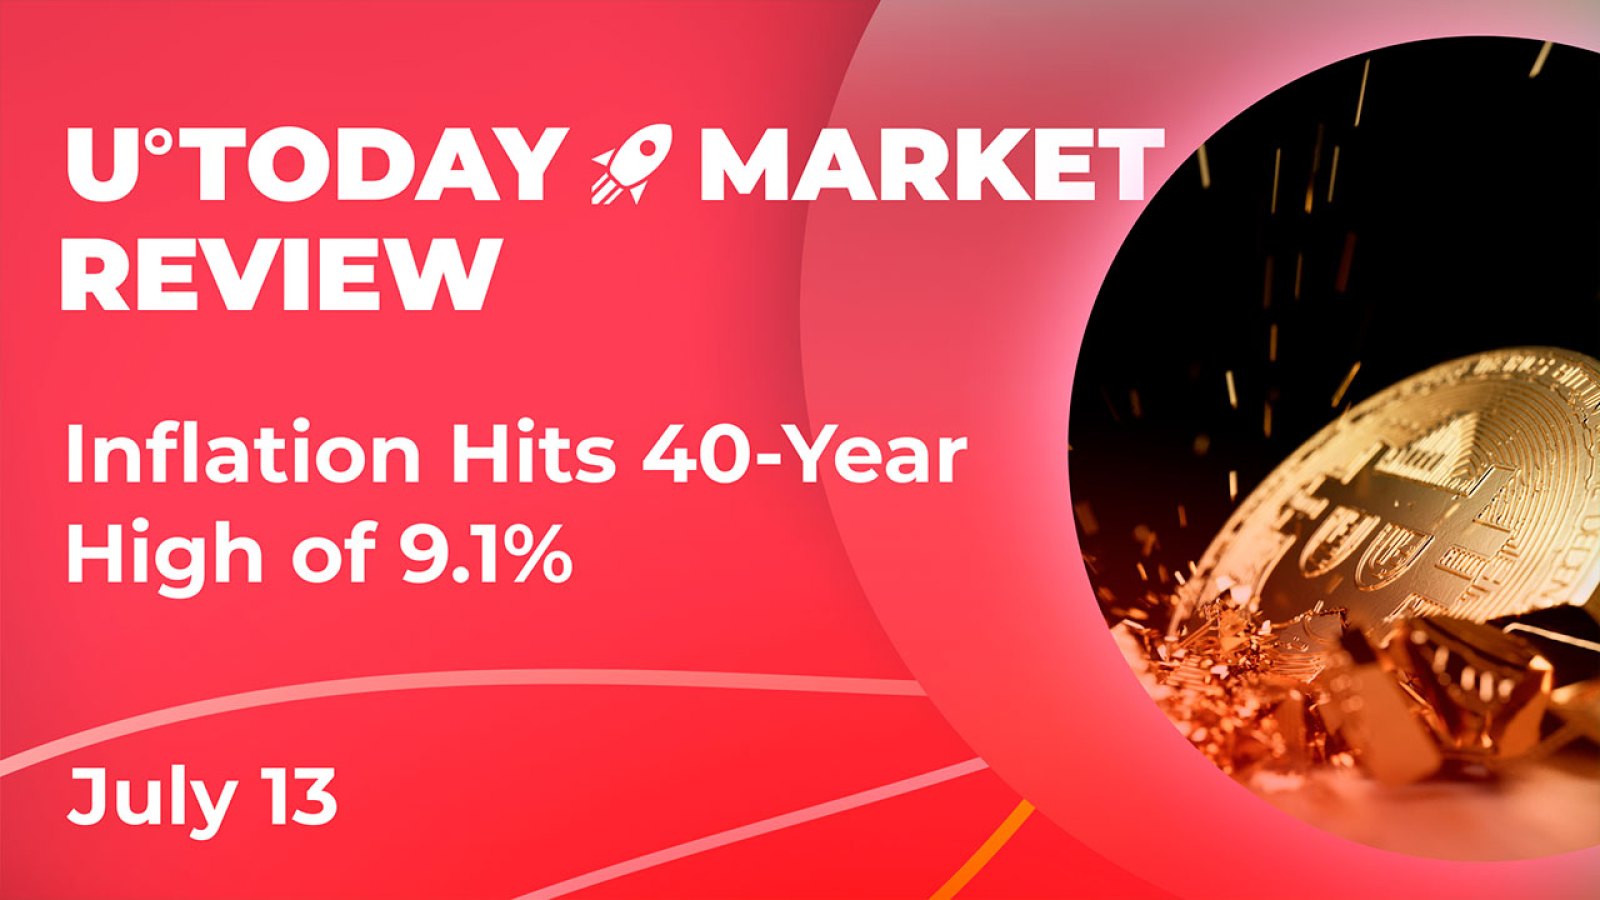 Bitcoin, Altcoins and Market Tumble Down as Inflation Hits 40-Year High of 9.1%: Crypto Market Review, July 13